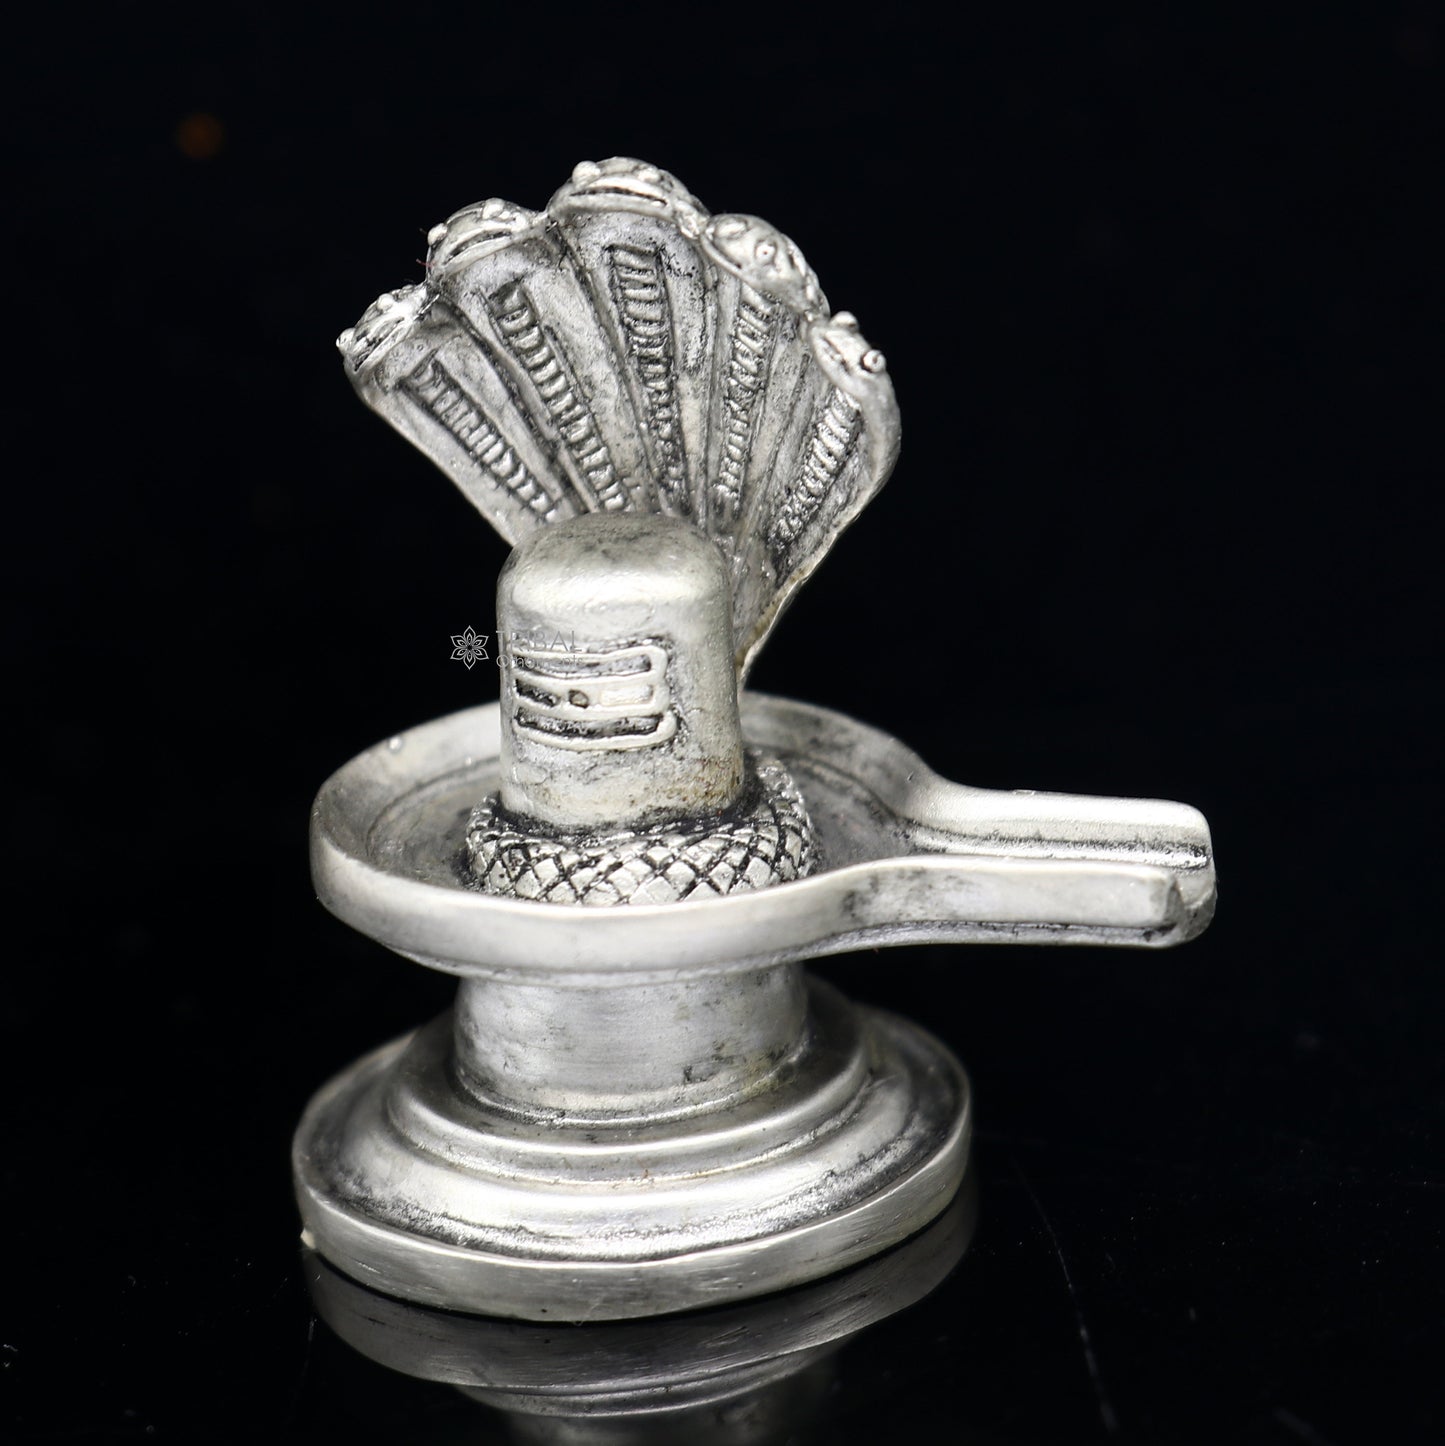 925 sterling silver lord Shiva lingam Jalheri/ jaladhari Divine Shiva lingam at home temple puja worshipping article from India art655 - TRIBAL ORNAMENTS